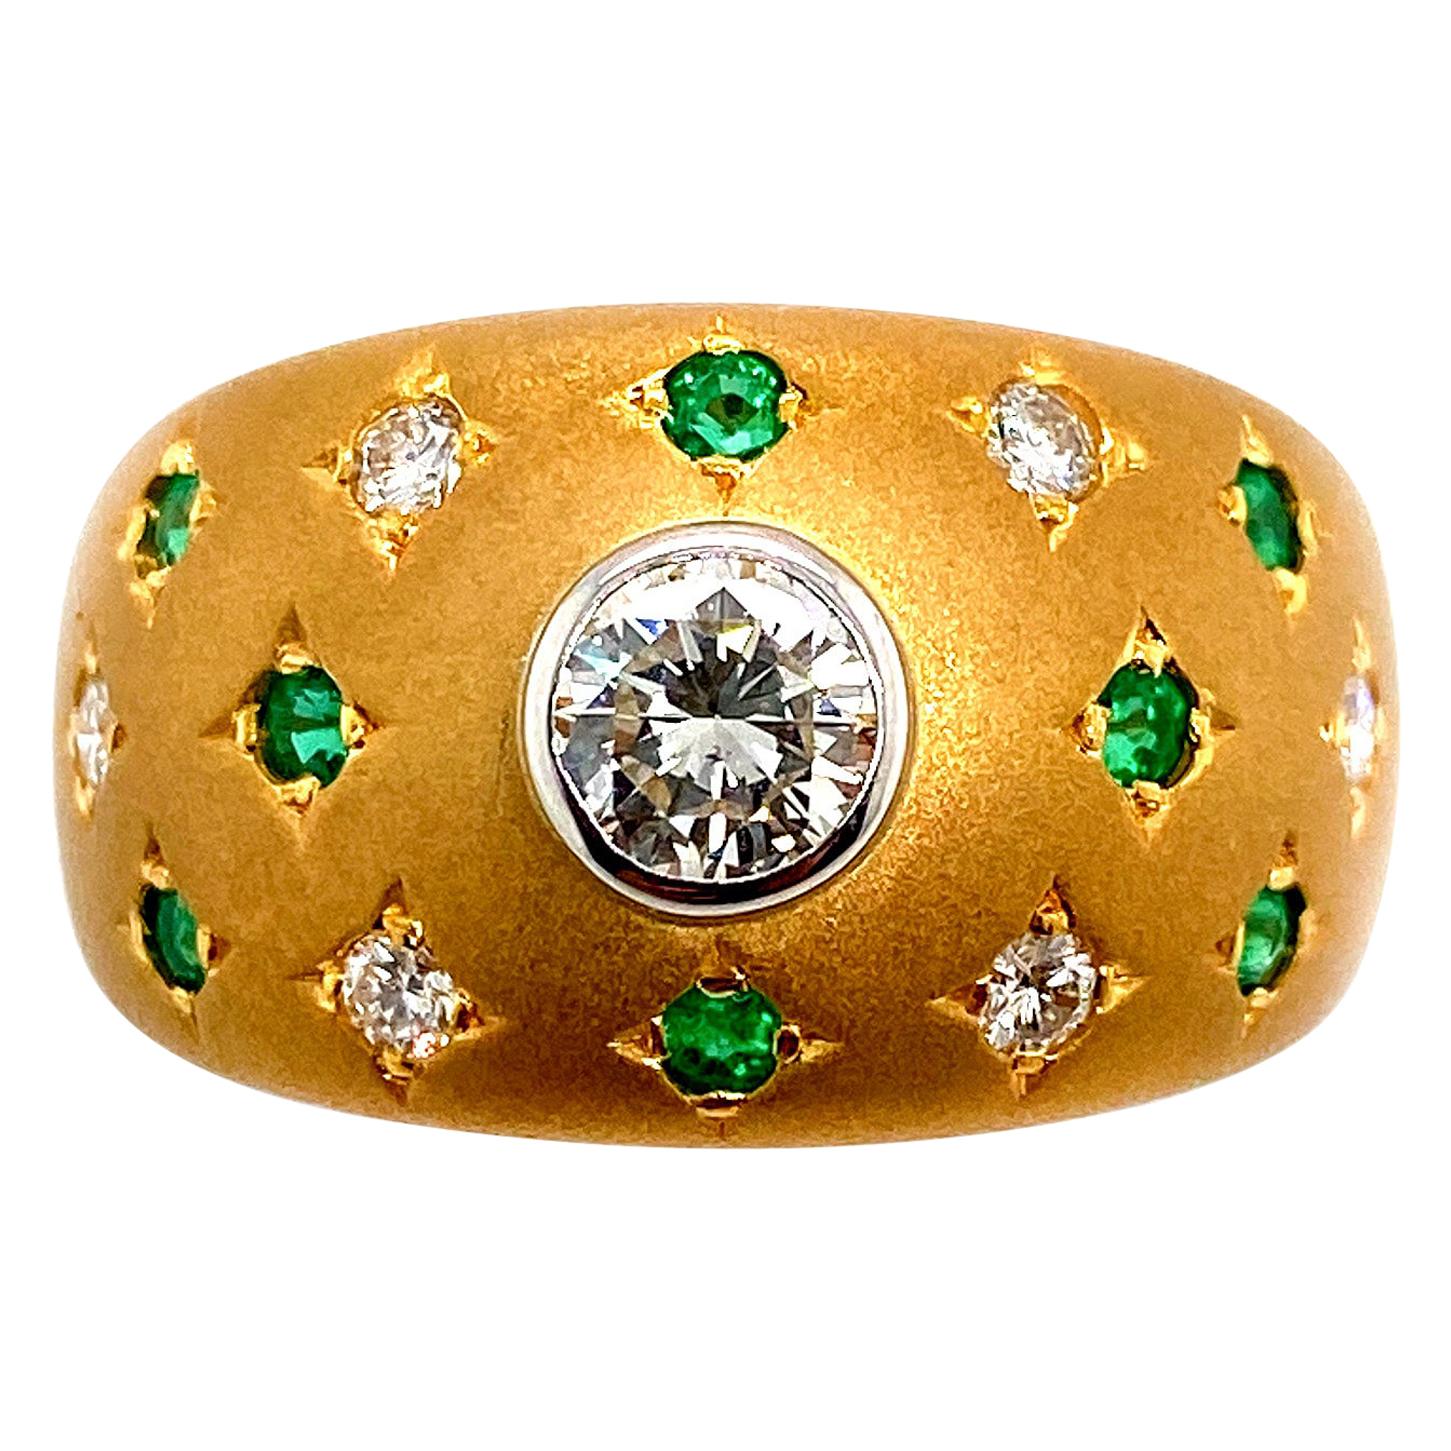 Starry Diamond and Emerald Artisanal Dome Ring in 18 Karat Gold